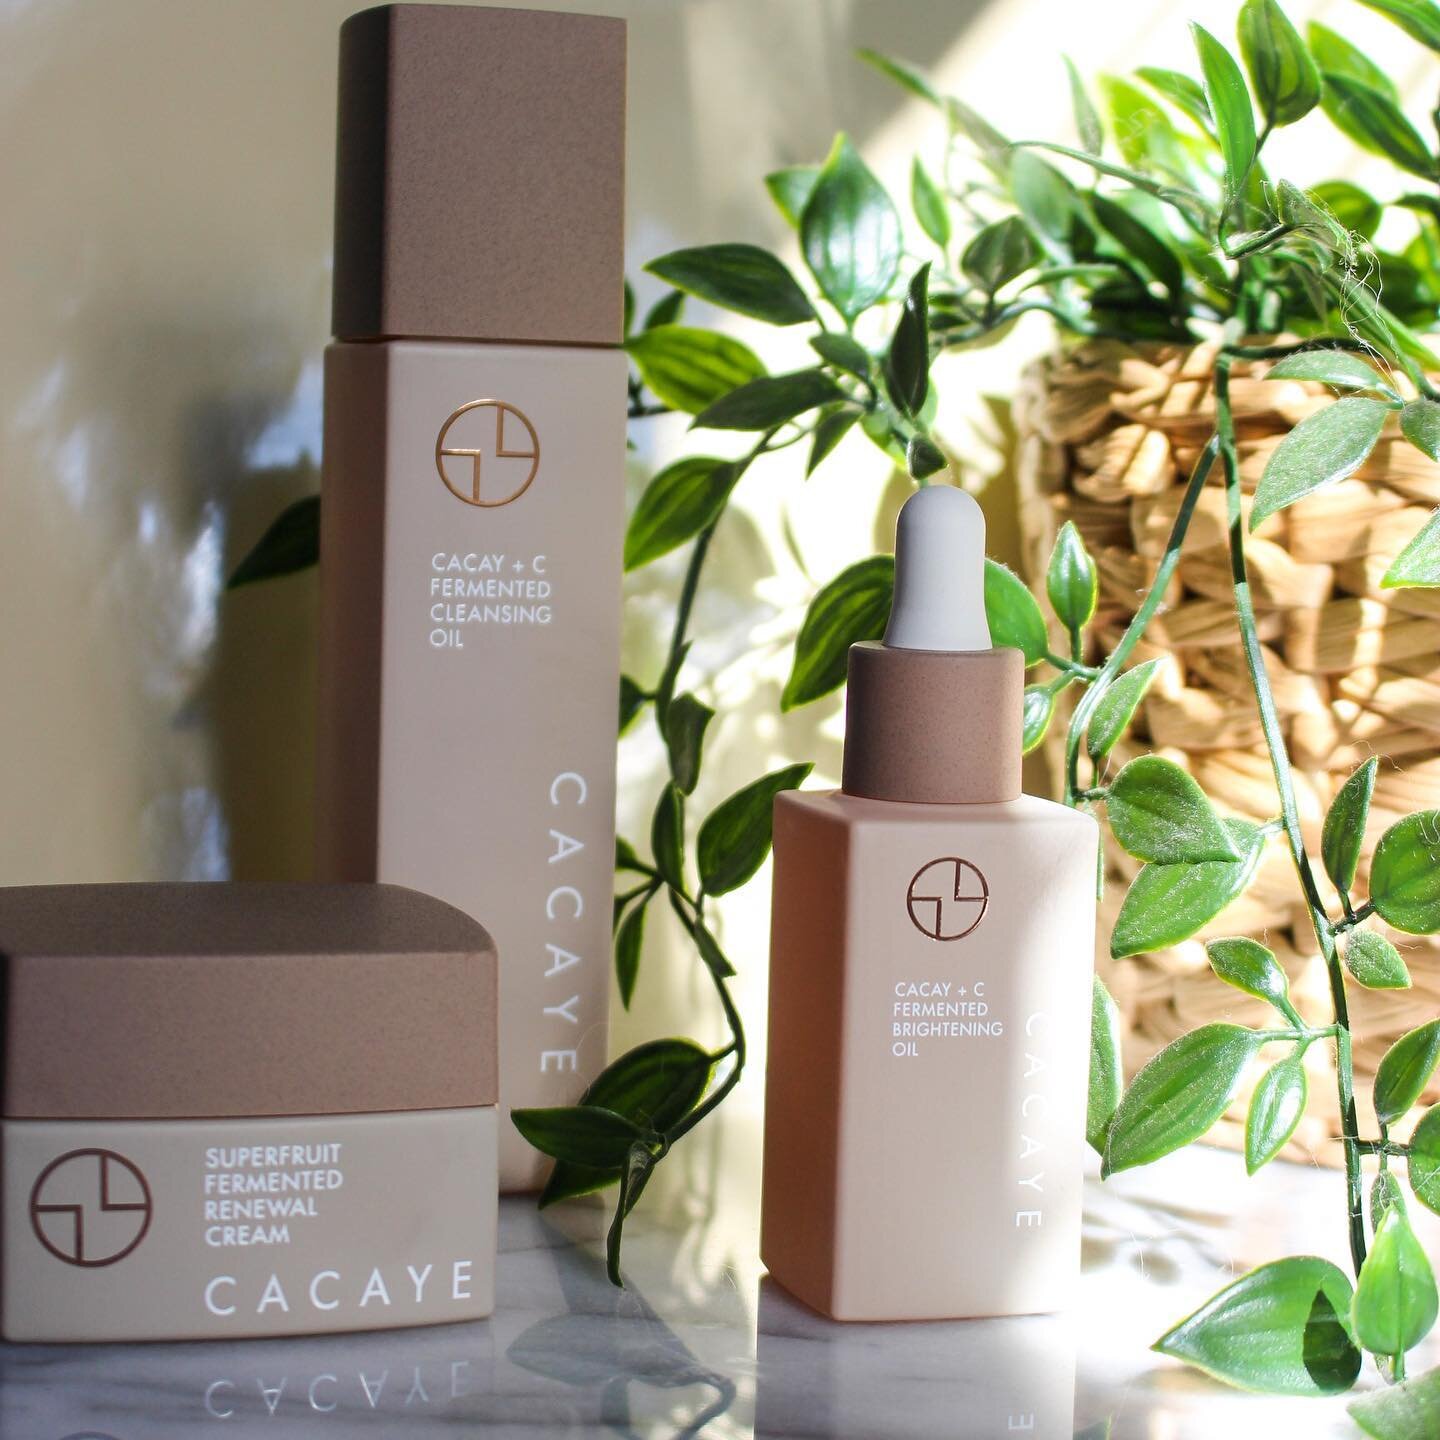 Looking to up your skincare routine 👀 check out our client @cacayelife